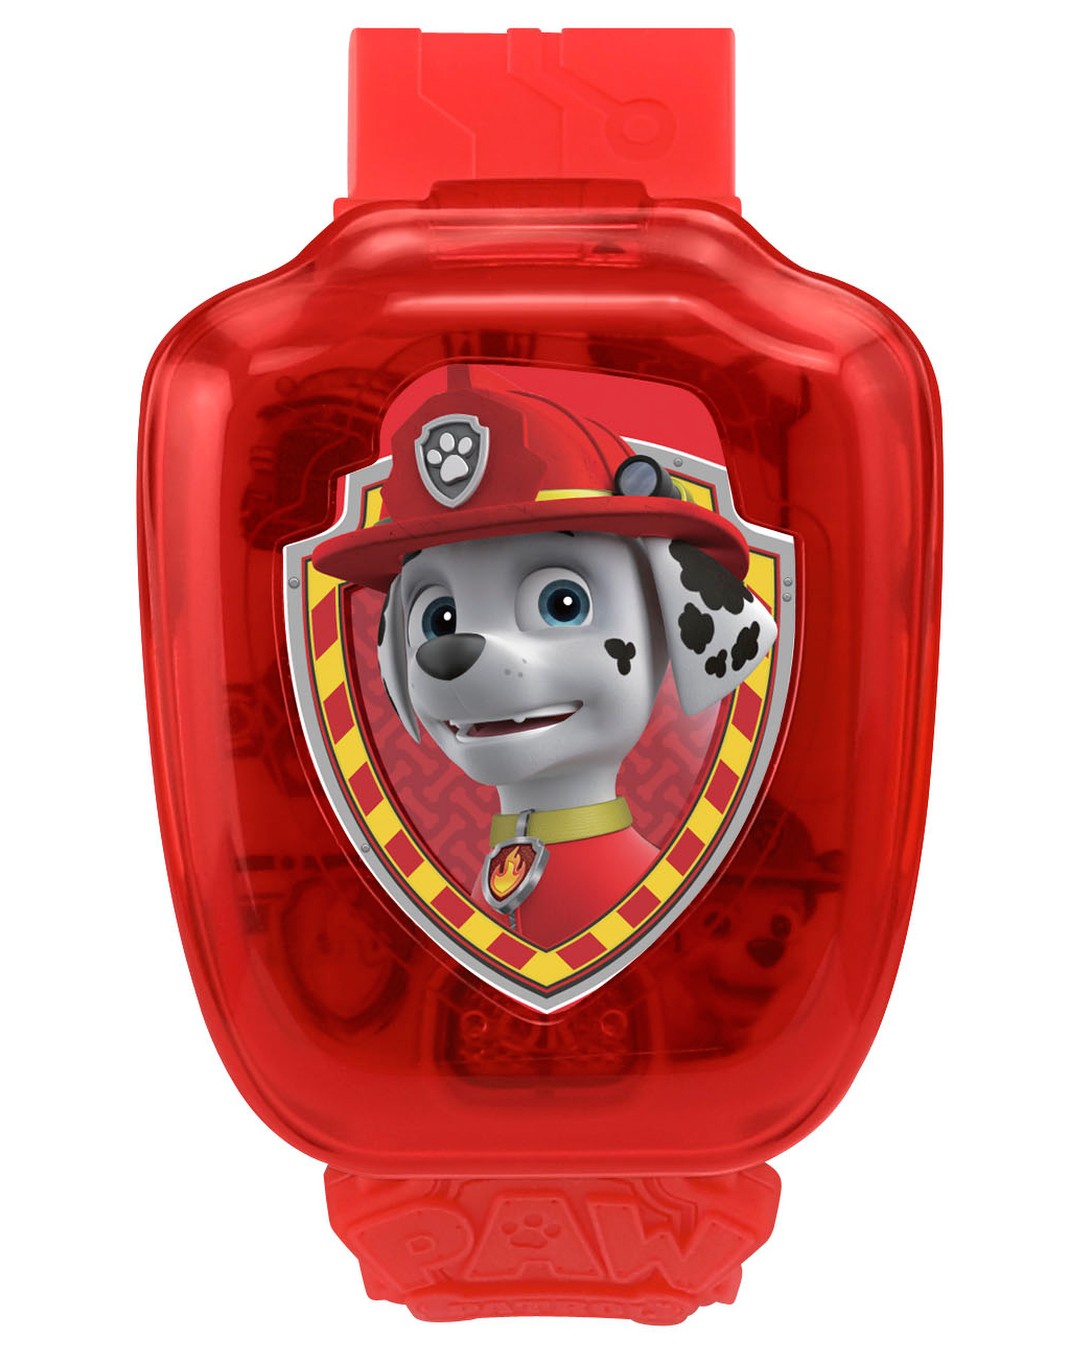 PAW Patrol Marshall Toy Marshall Learning Watch │ VTech®